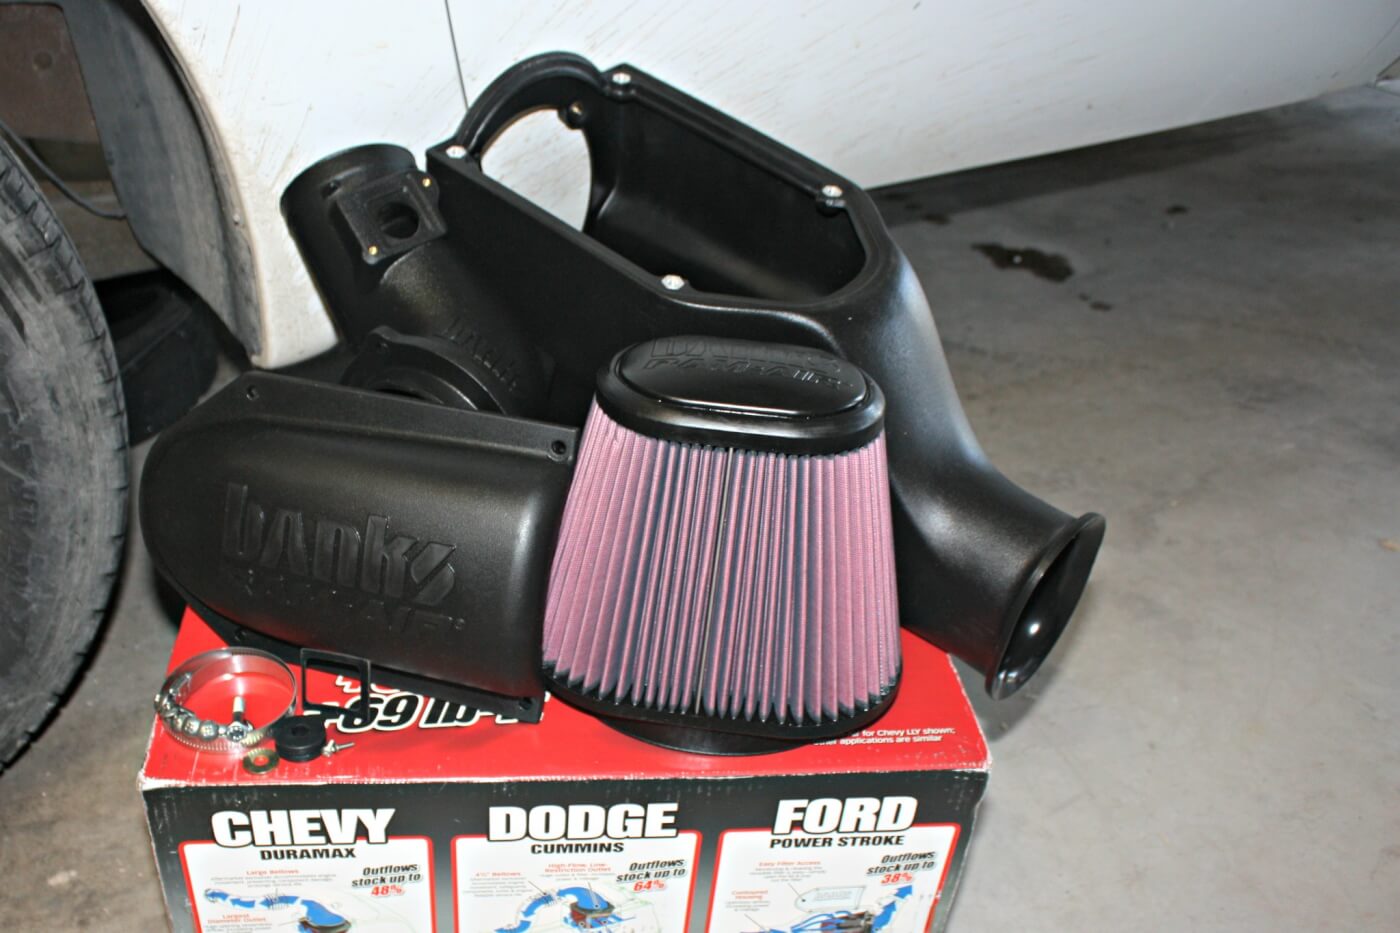 1. The Banks Ram-Air Intake system is a simple to install stock replacement kit that increases airflow by up to 38 percent on the 6.0L Power Stroke, which improves throttle response and turbo spool-up time.